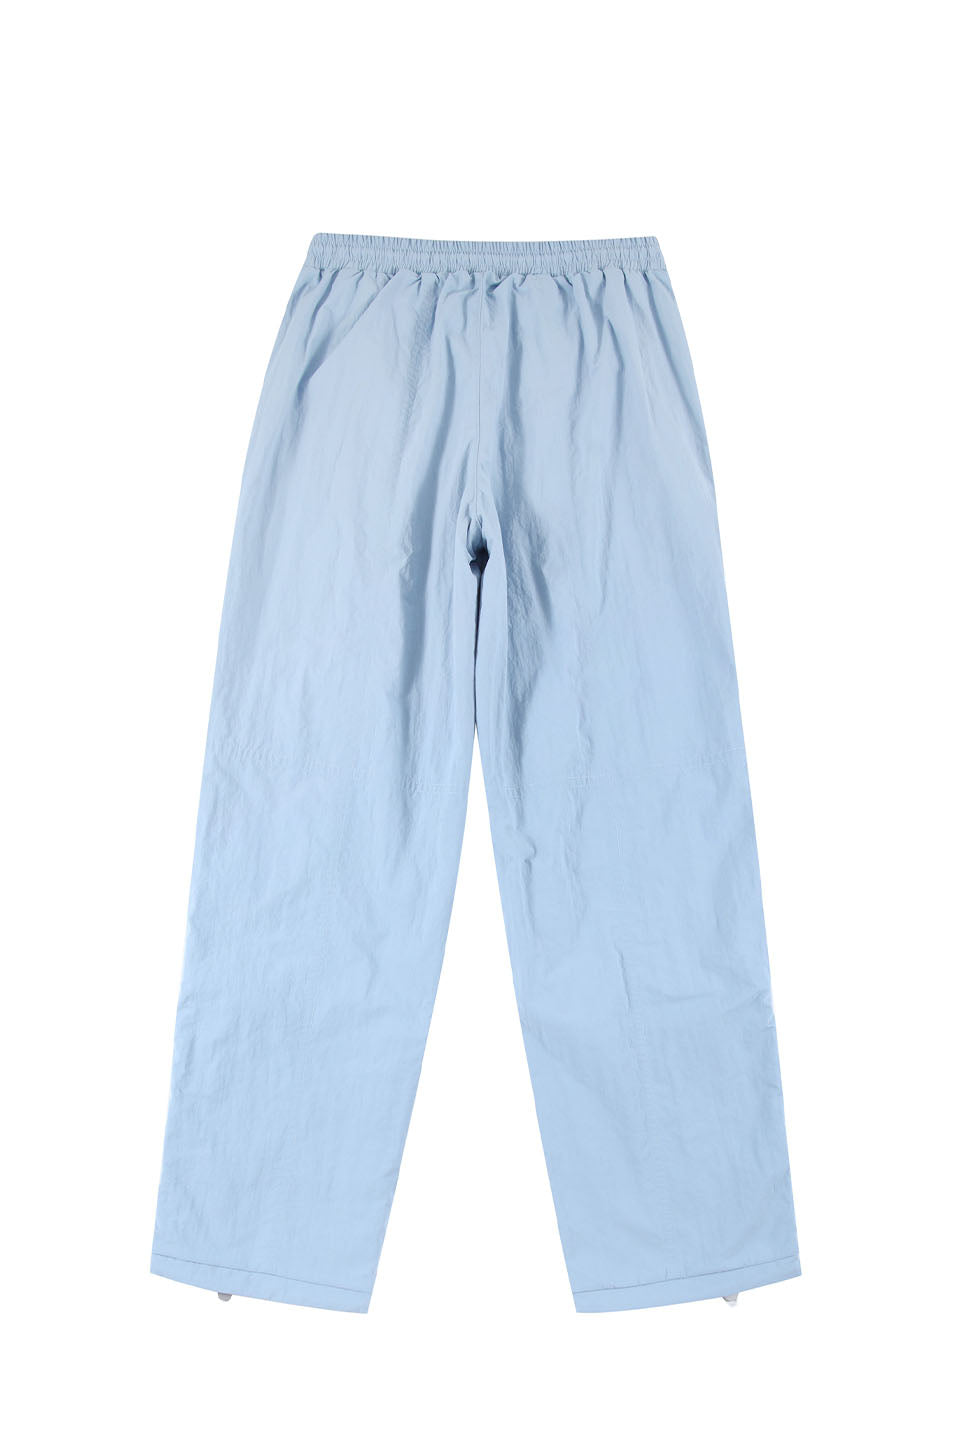 Baby Blue / White Zipped Track Pants